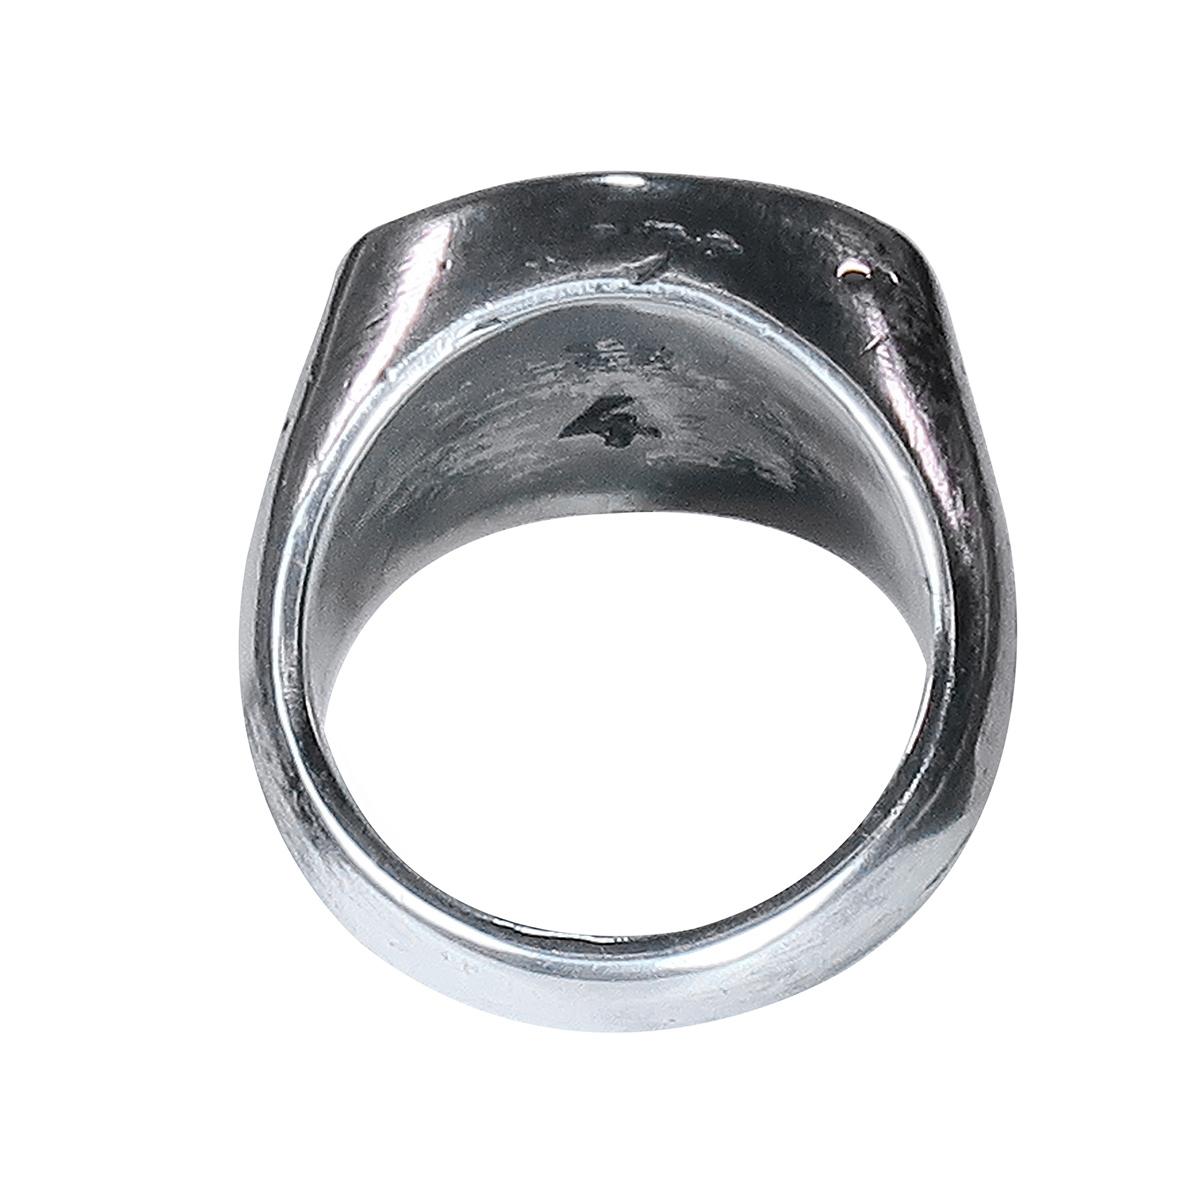 Maison Martin Margiela Silver Signet ring with pre-used effects.
Fall 2003, Line 4 Accessories. 

Kicks & scratches are parts of the design and similar on all 3 sizes. 
Silver hallmark inside under the 